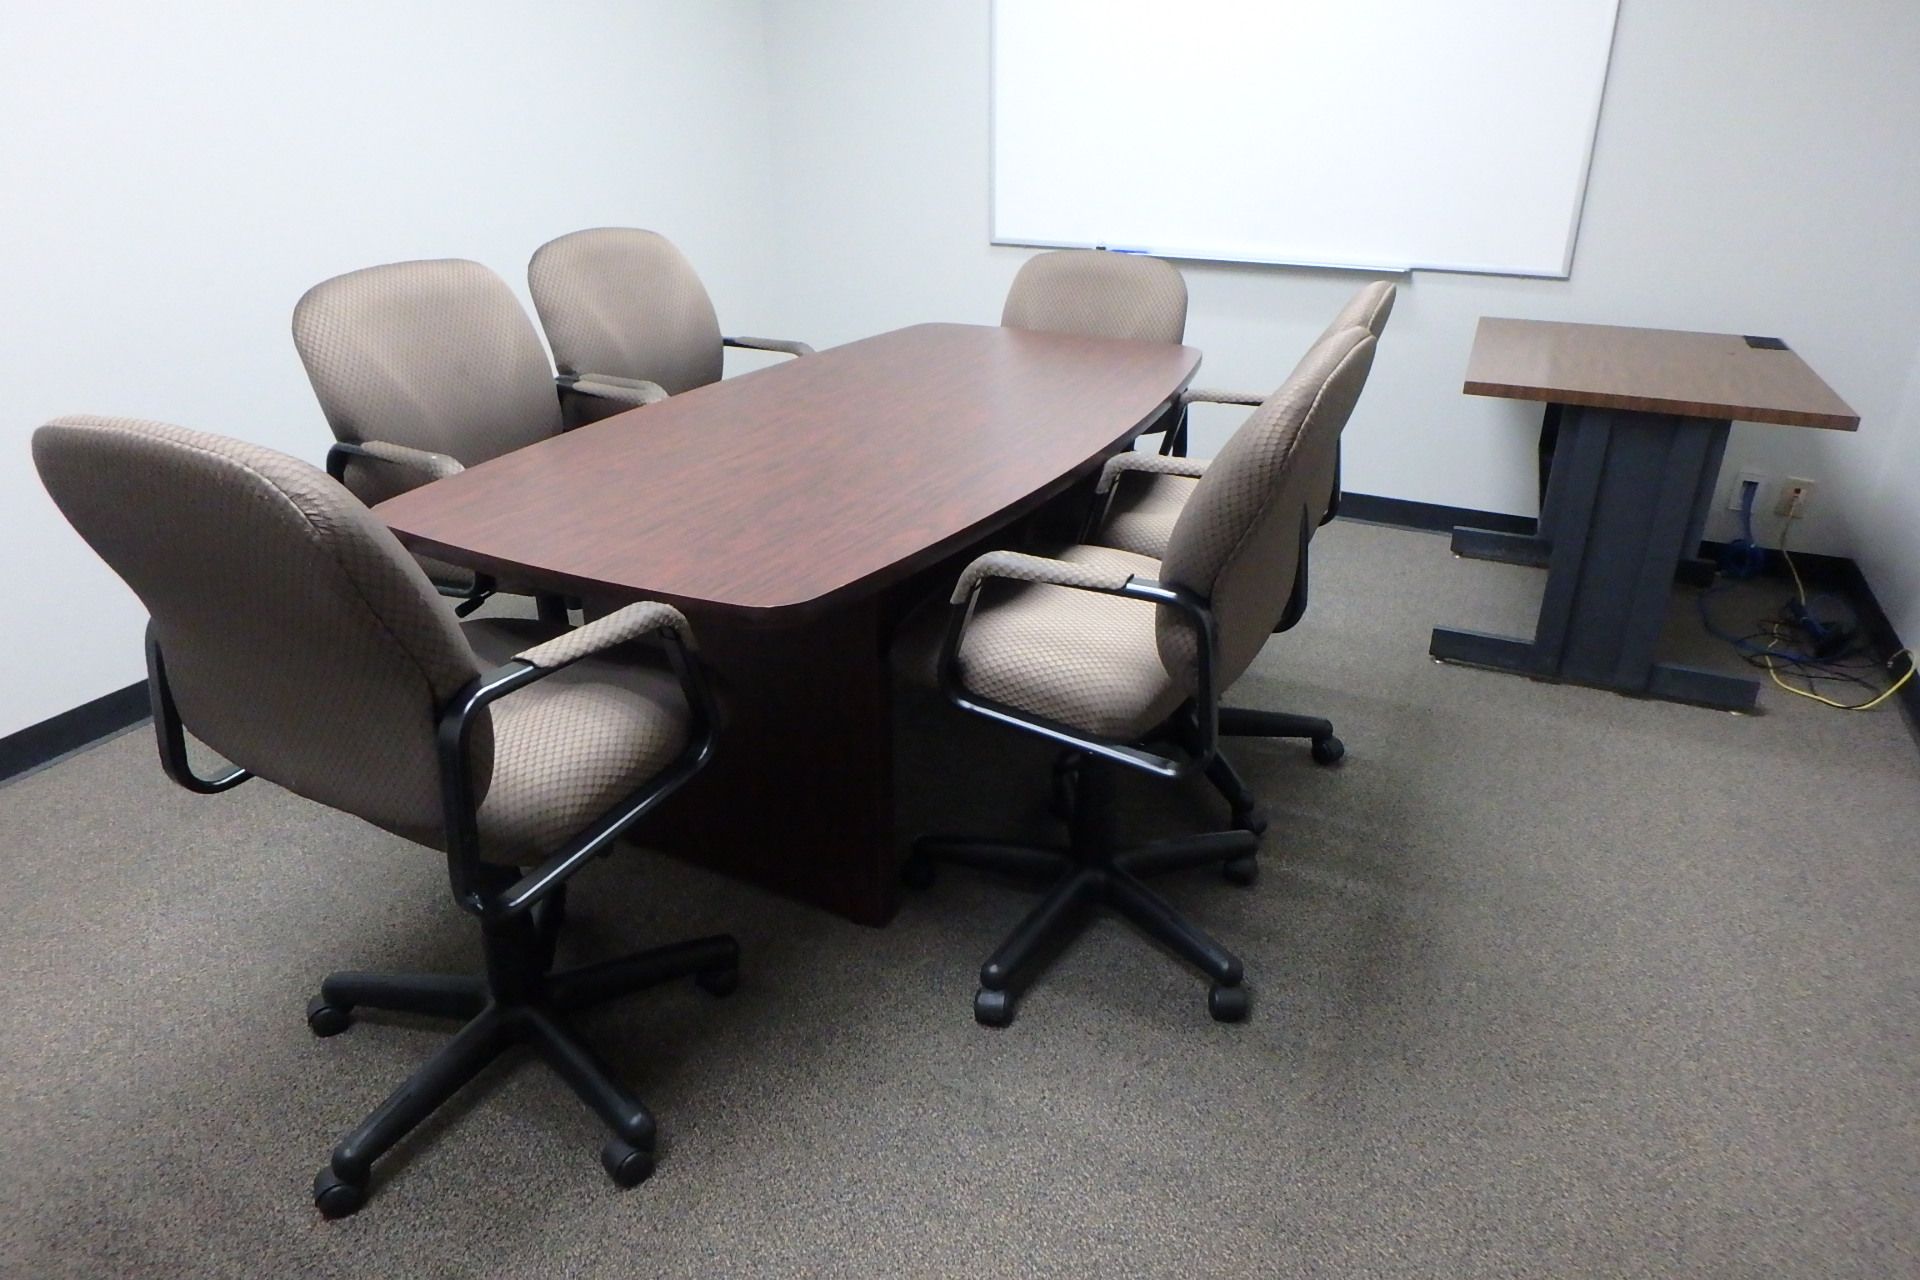 Contents of Office Including: (1) Conference Room Table; (6) Chairs; Cabinet; White Board; Desk